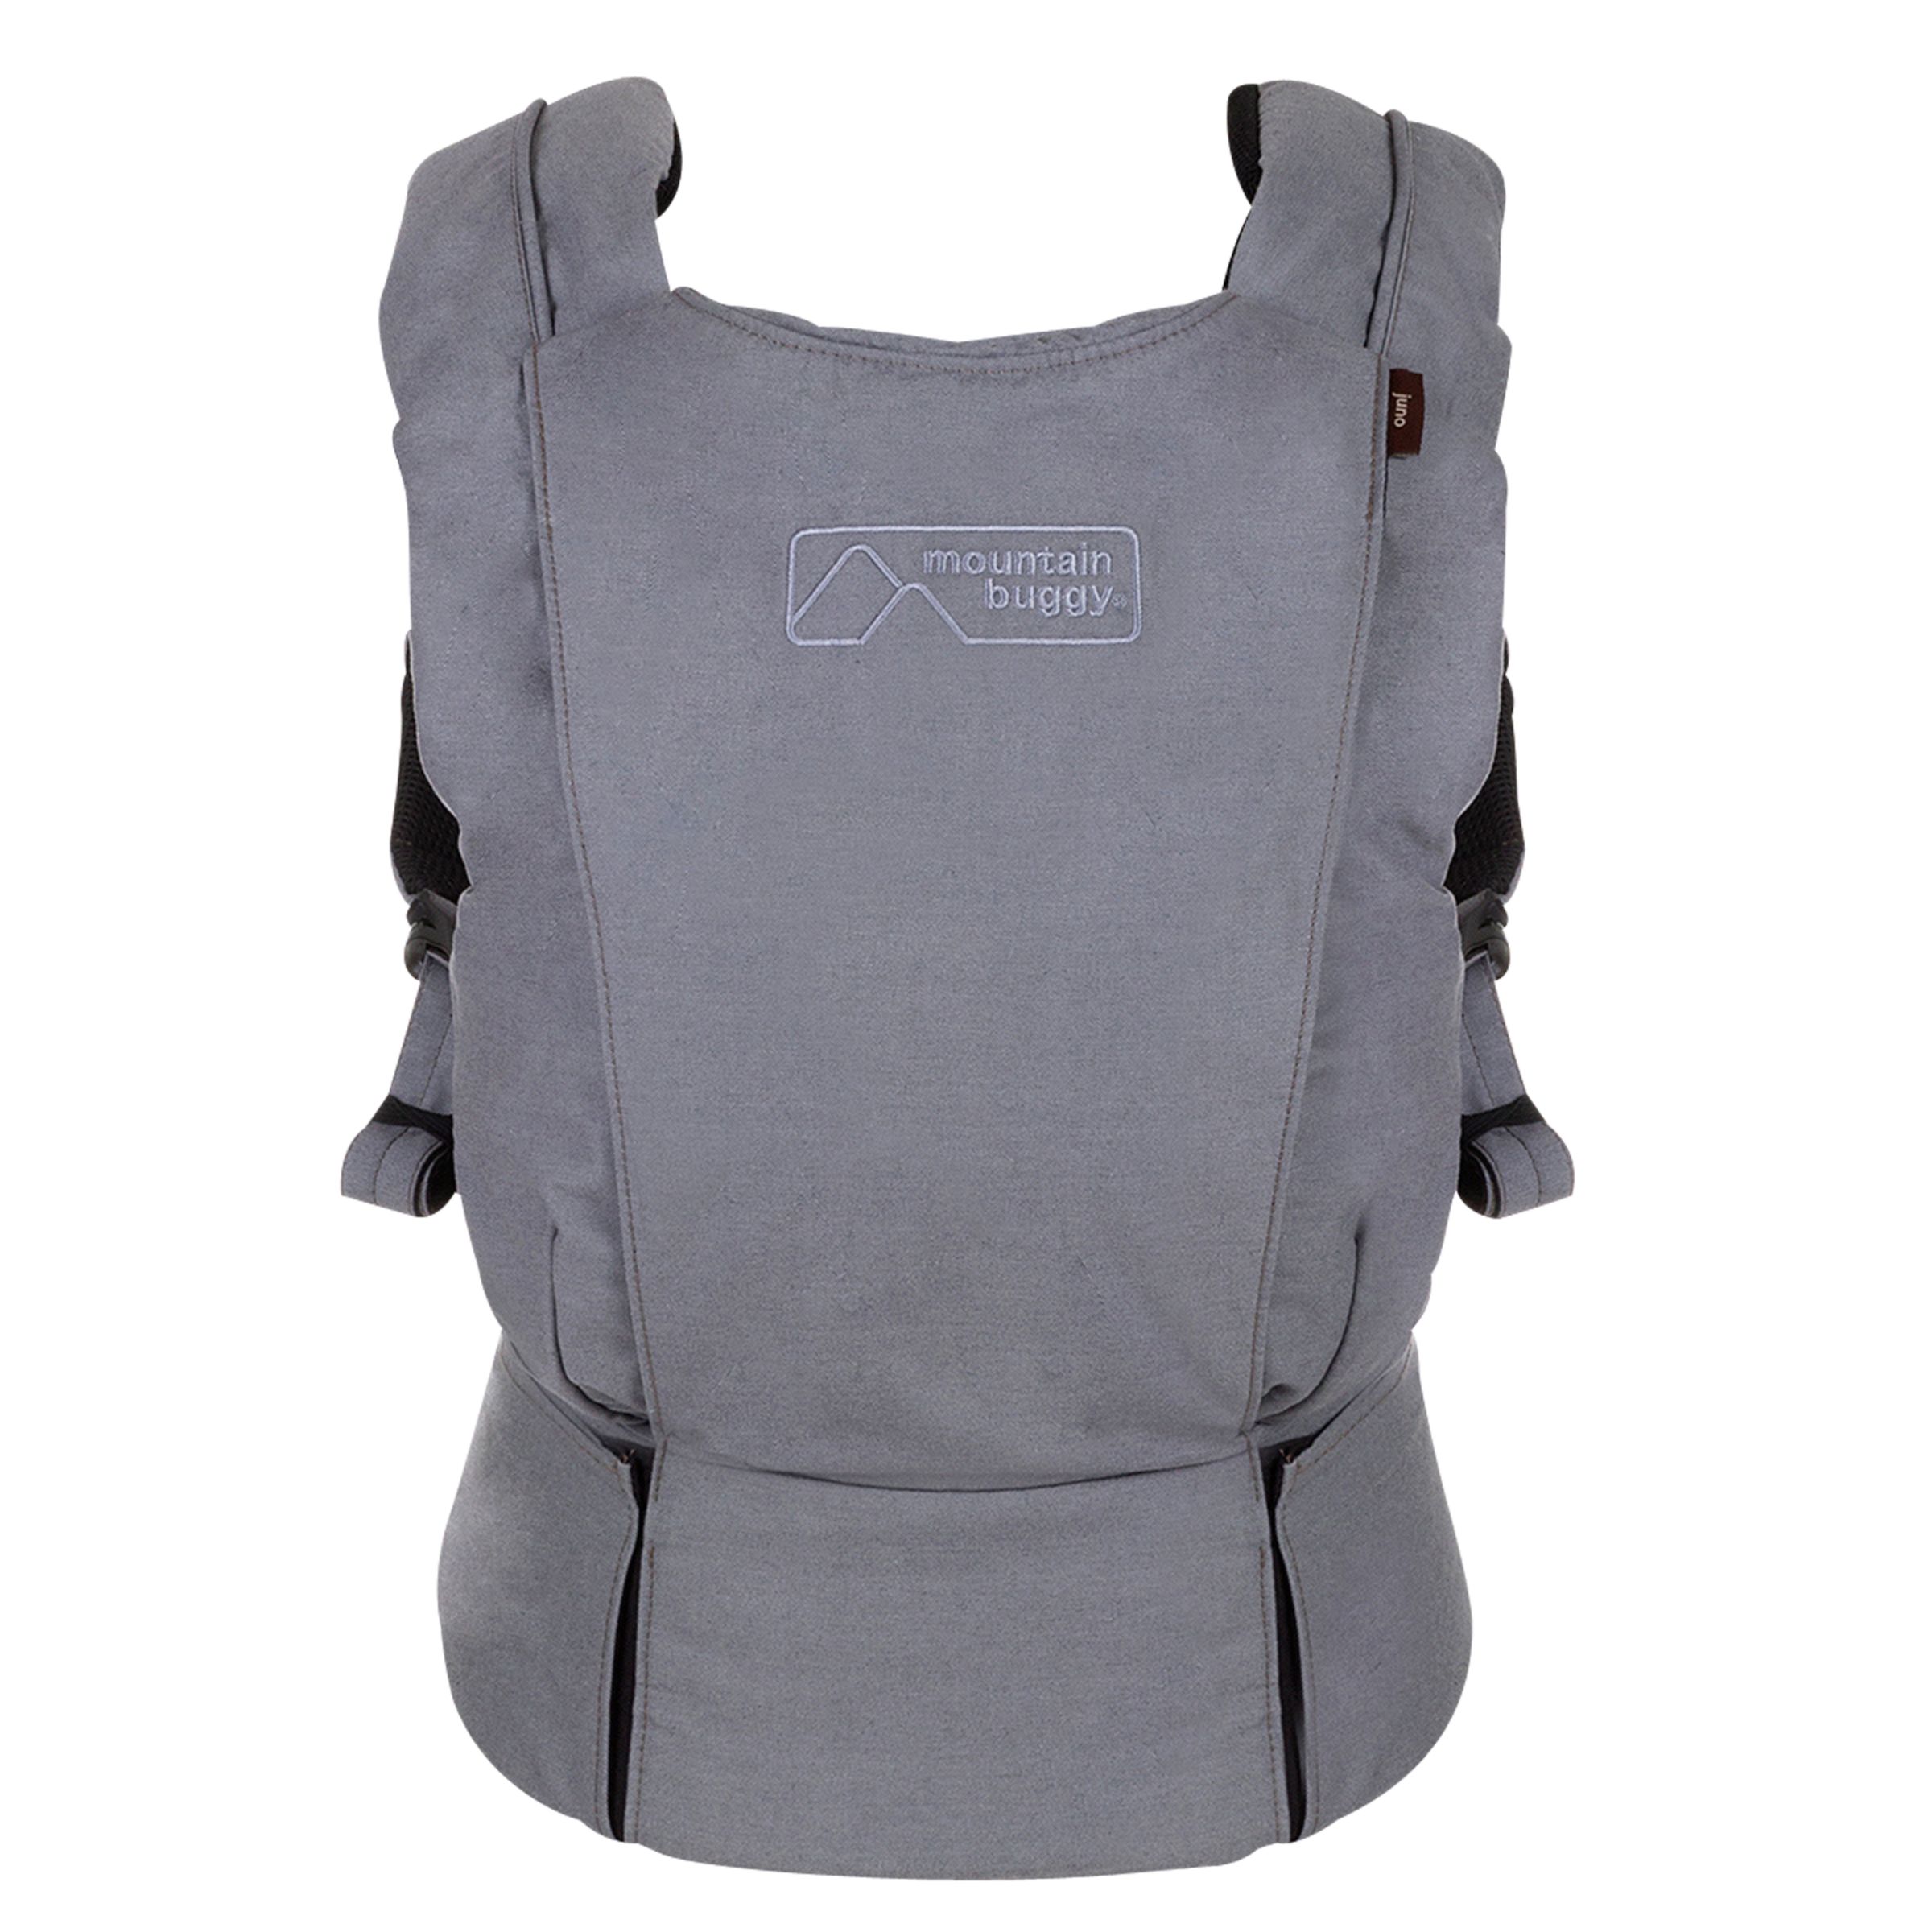 Mountain Buggy Juno Baby Carrier, Charcoal Grey